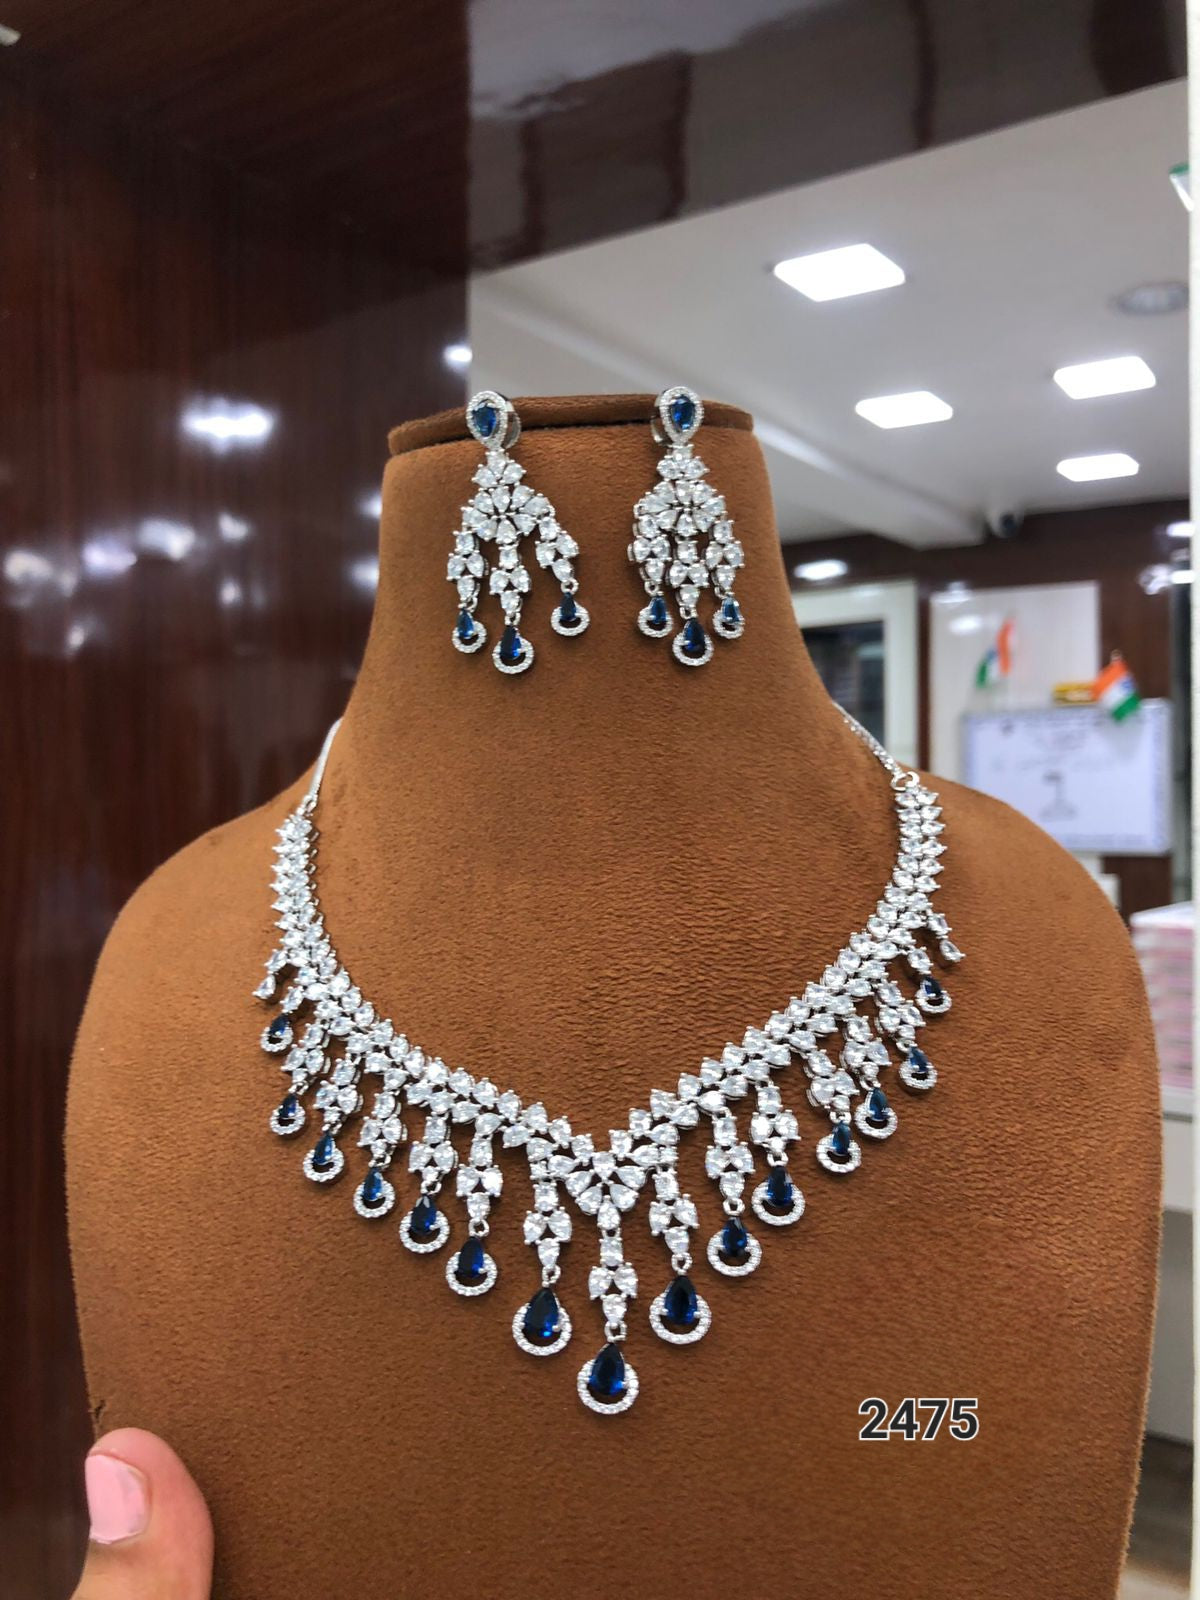 Radiant Elegance: The American Diamond Necklace and Earring Set by Sagunittujewel